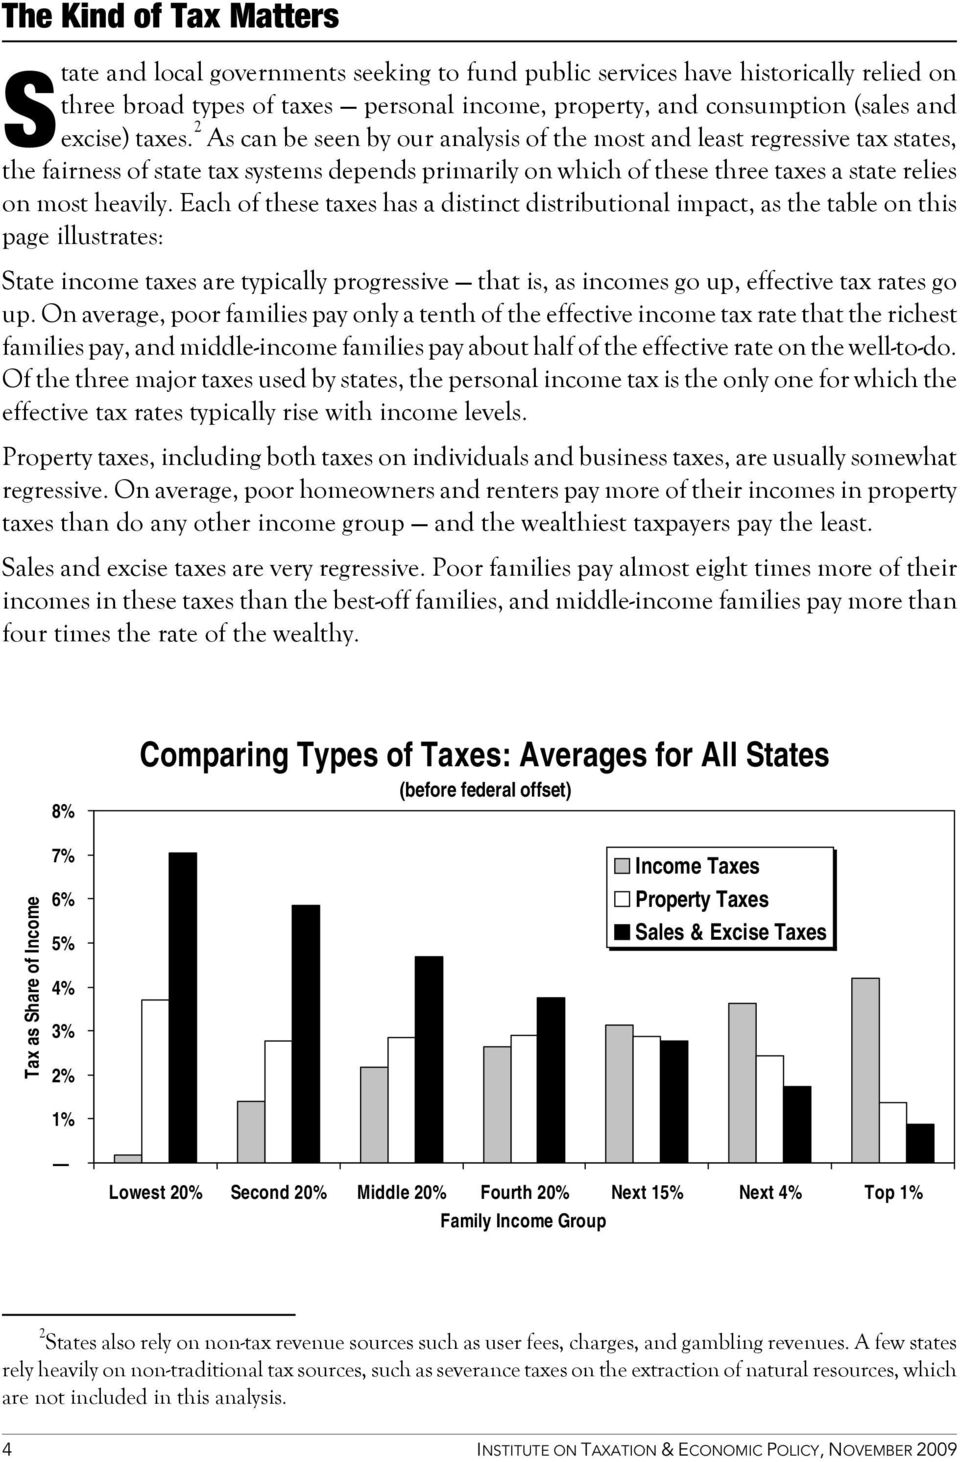 2 As can be seen by our analysis of the most and least regressive tax states, the fairness of state tax systems depends primarily on which of these three taxes a state relies on most heavily.